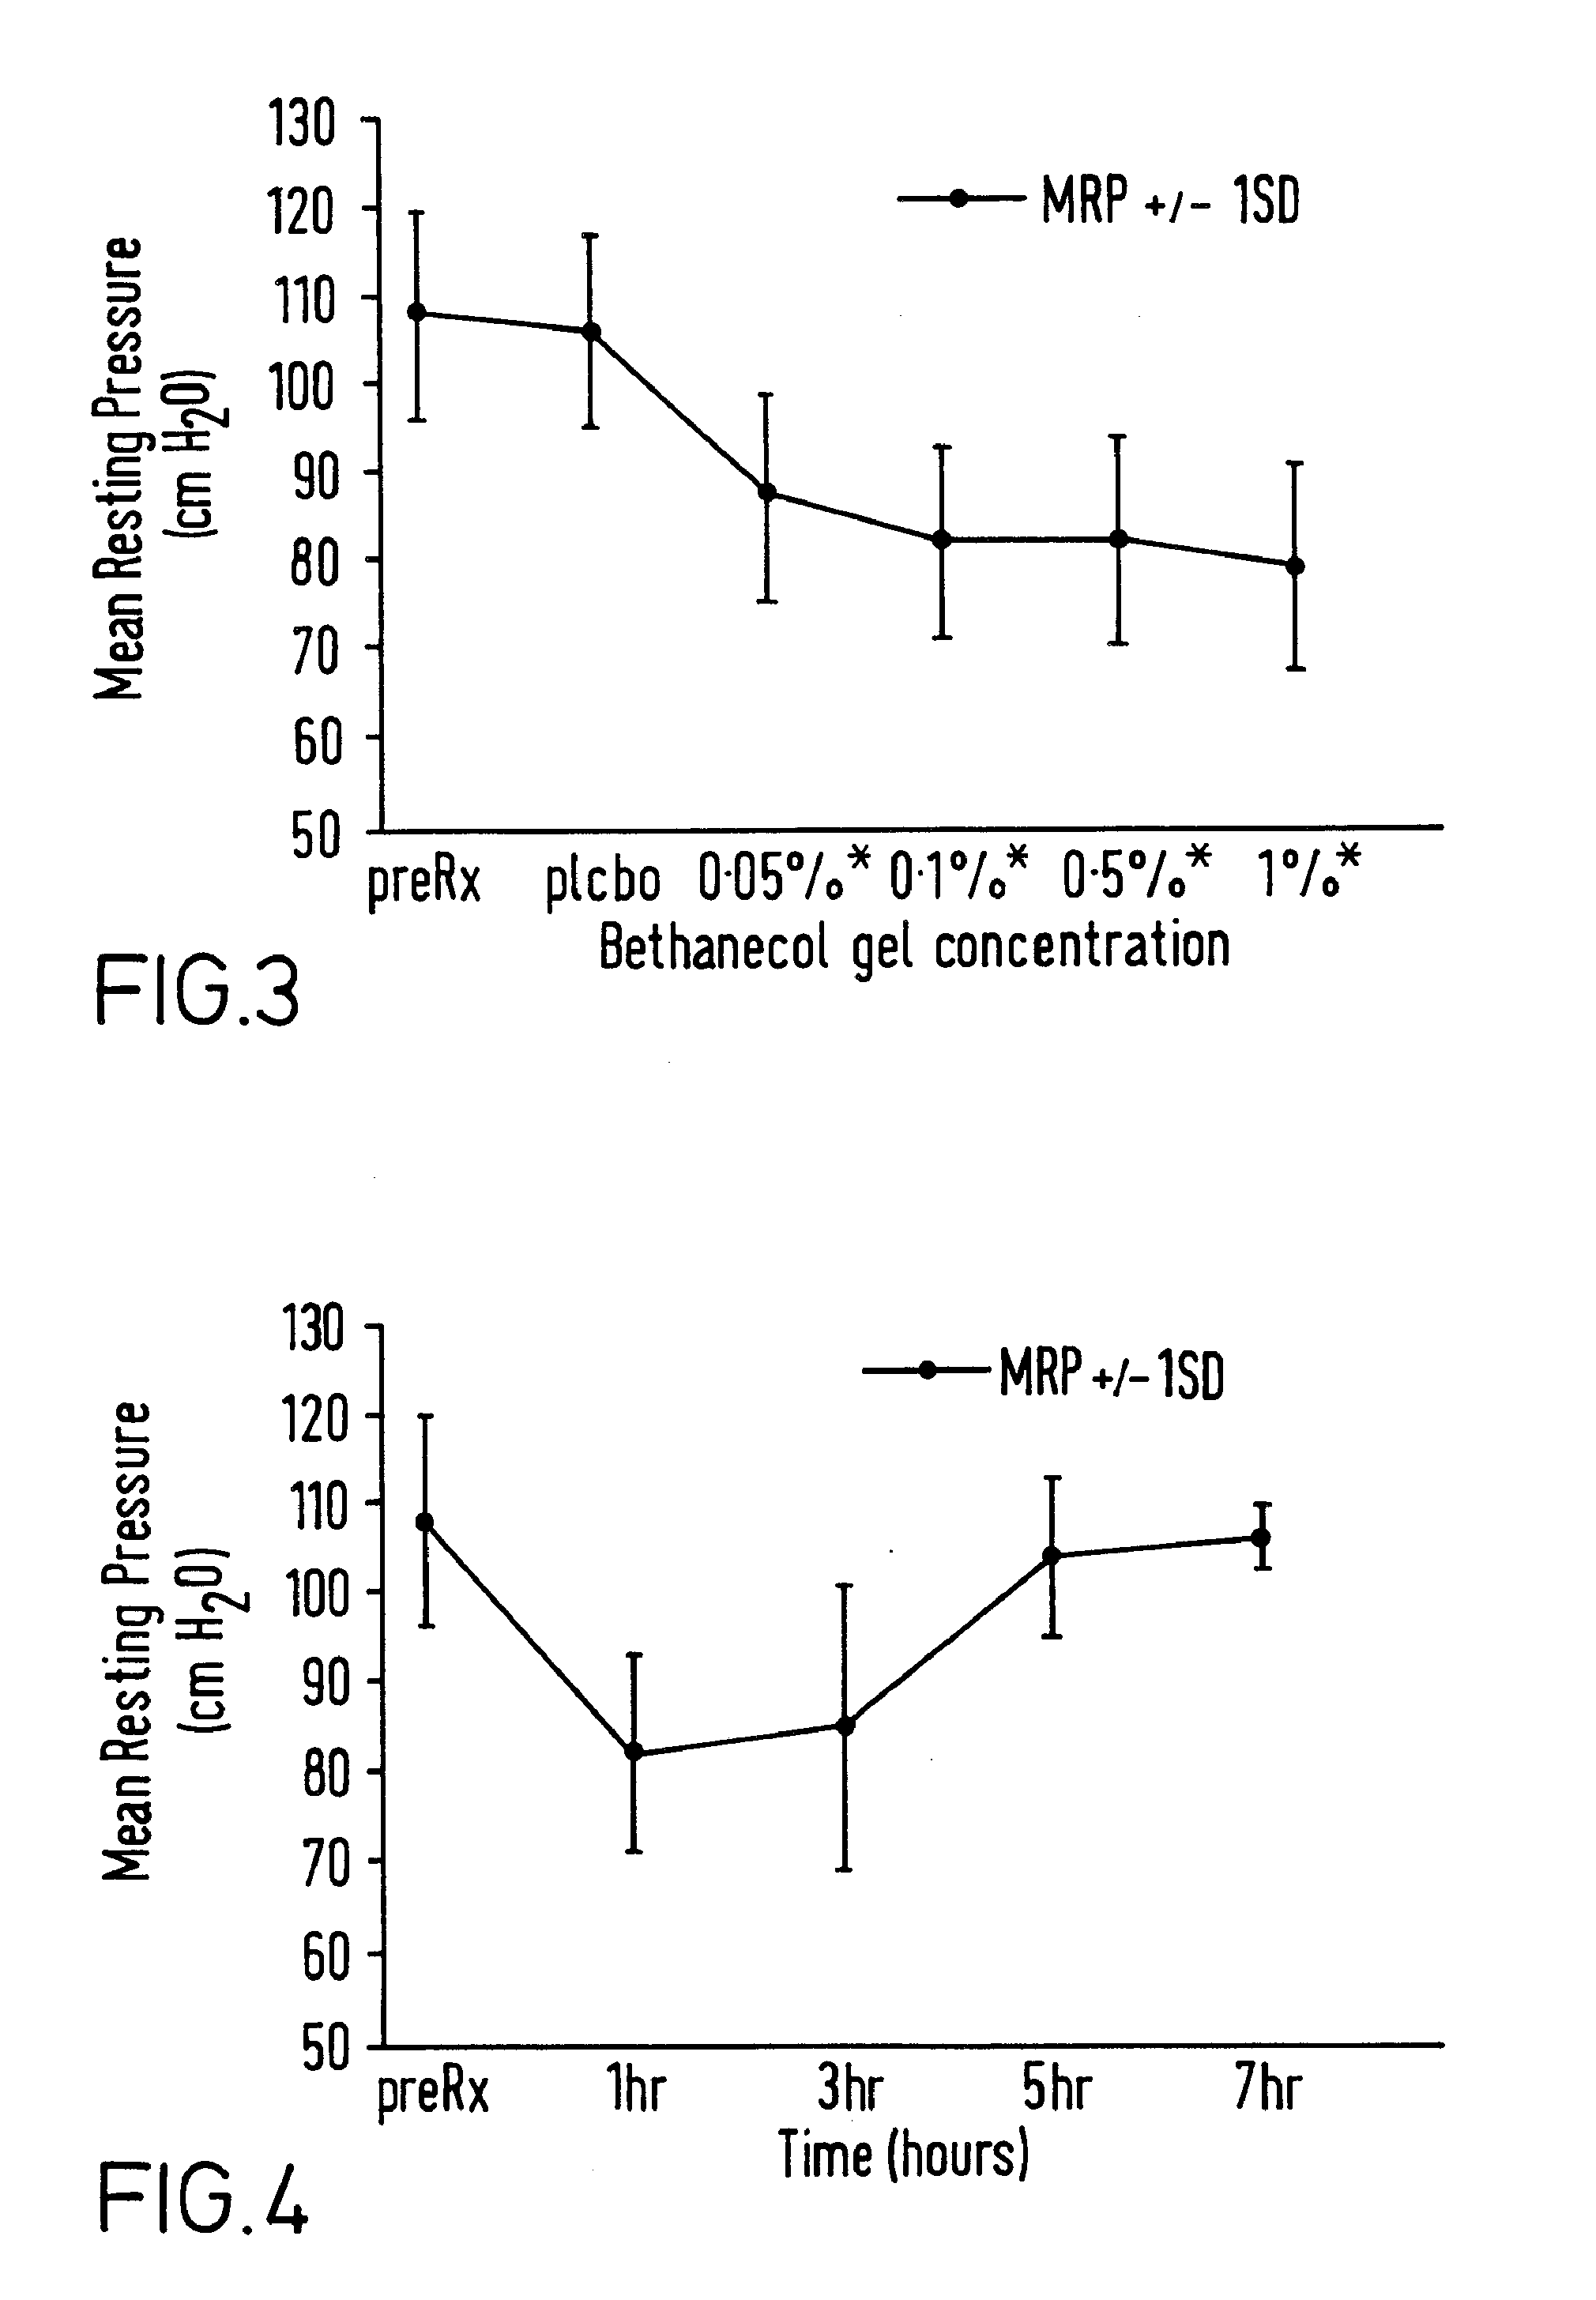 Topical pharmaceutical composition comprising a cholinergic agent or a calcium channel blocker